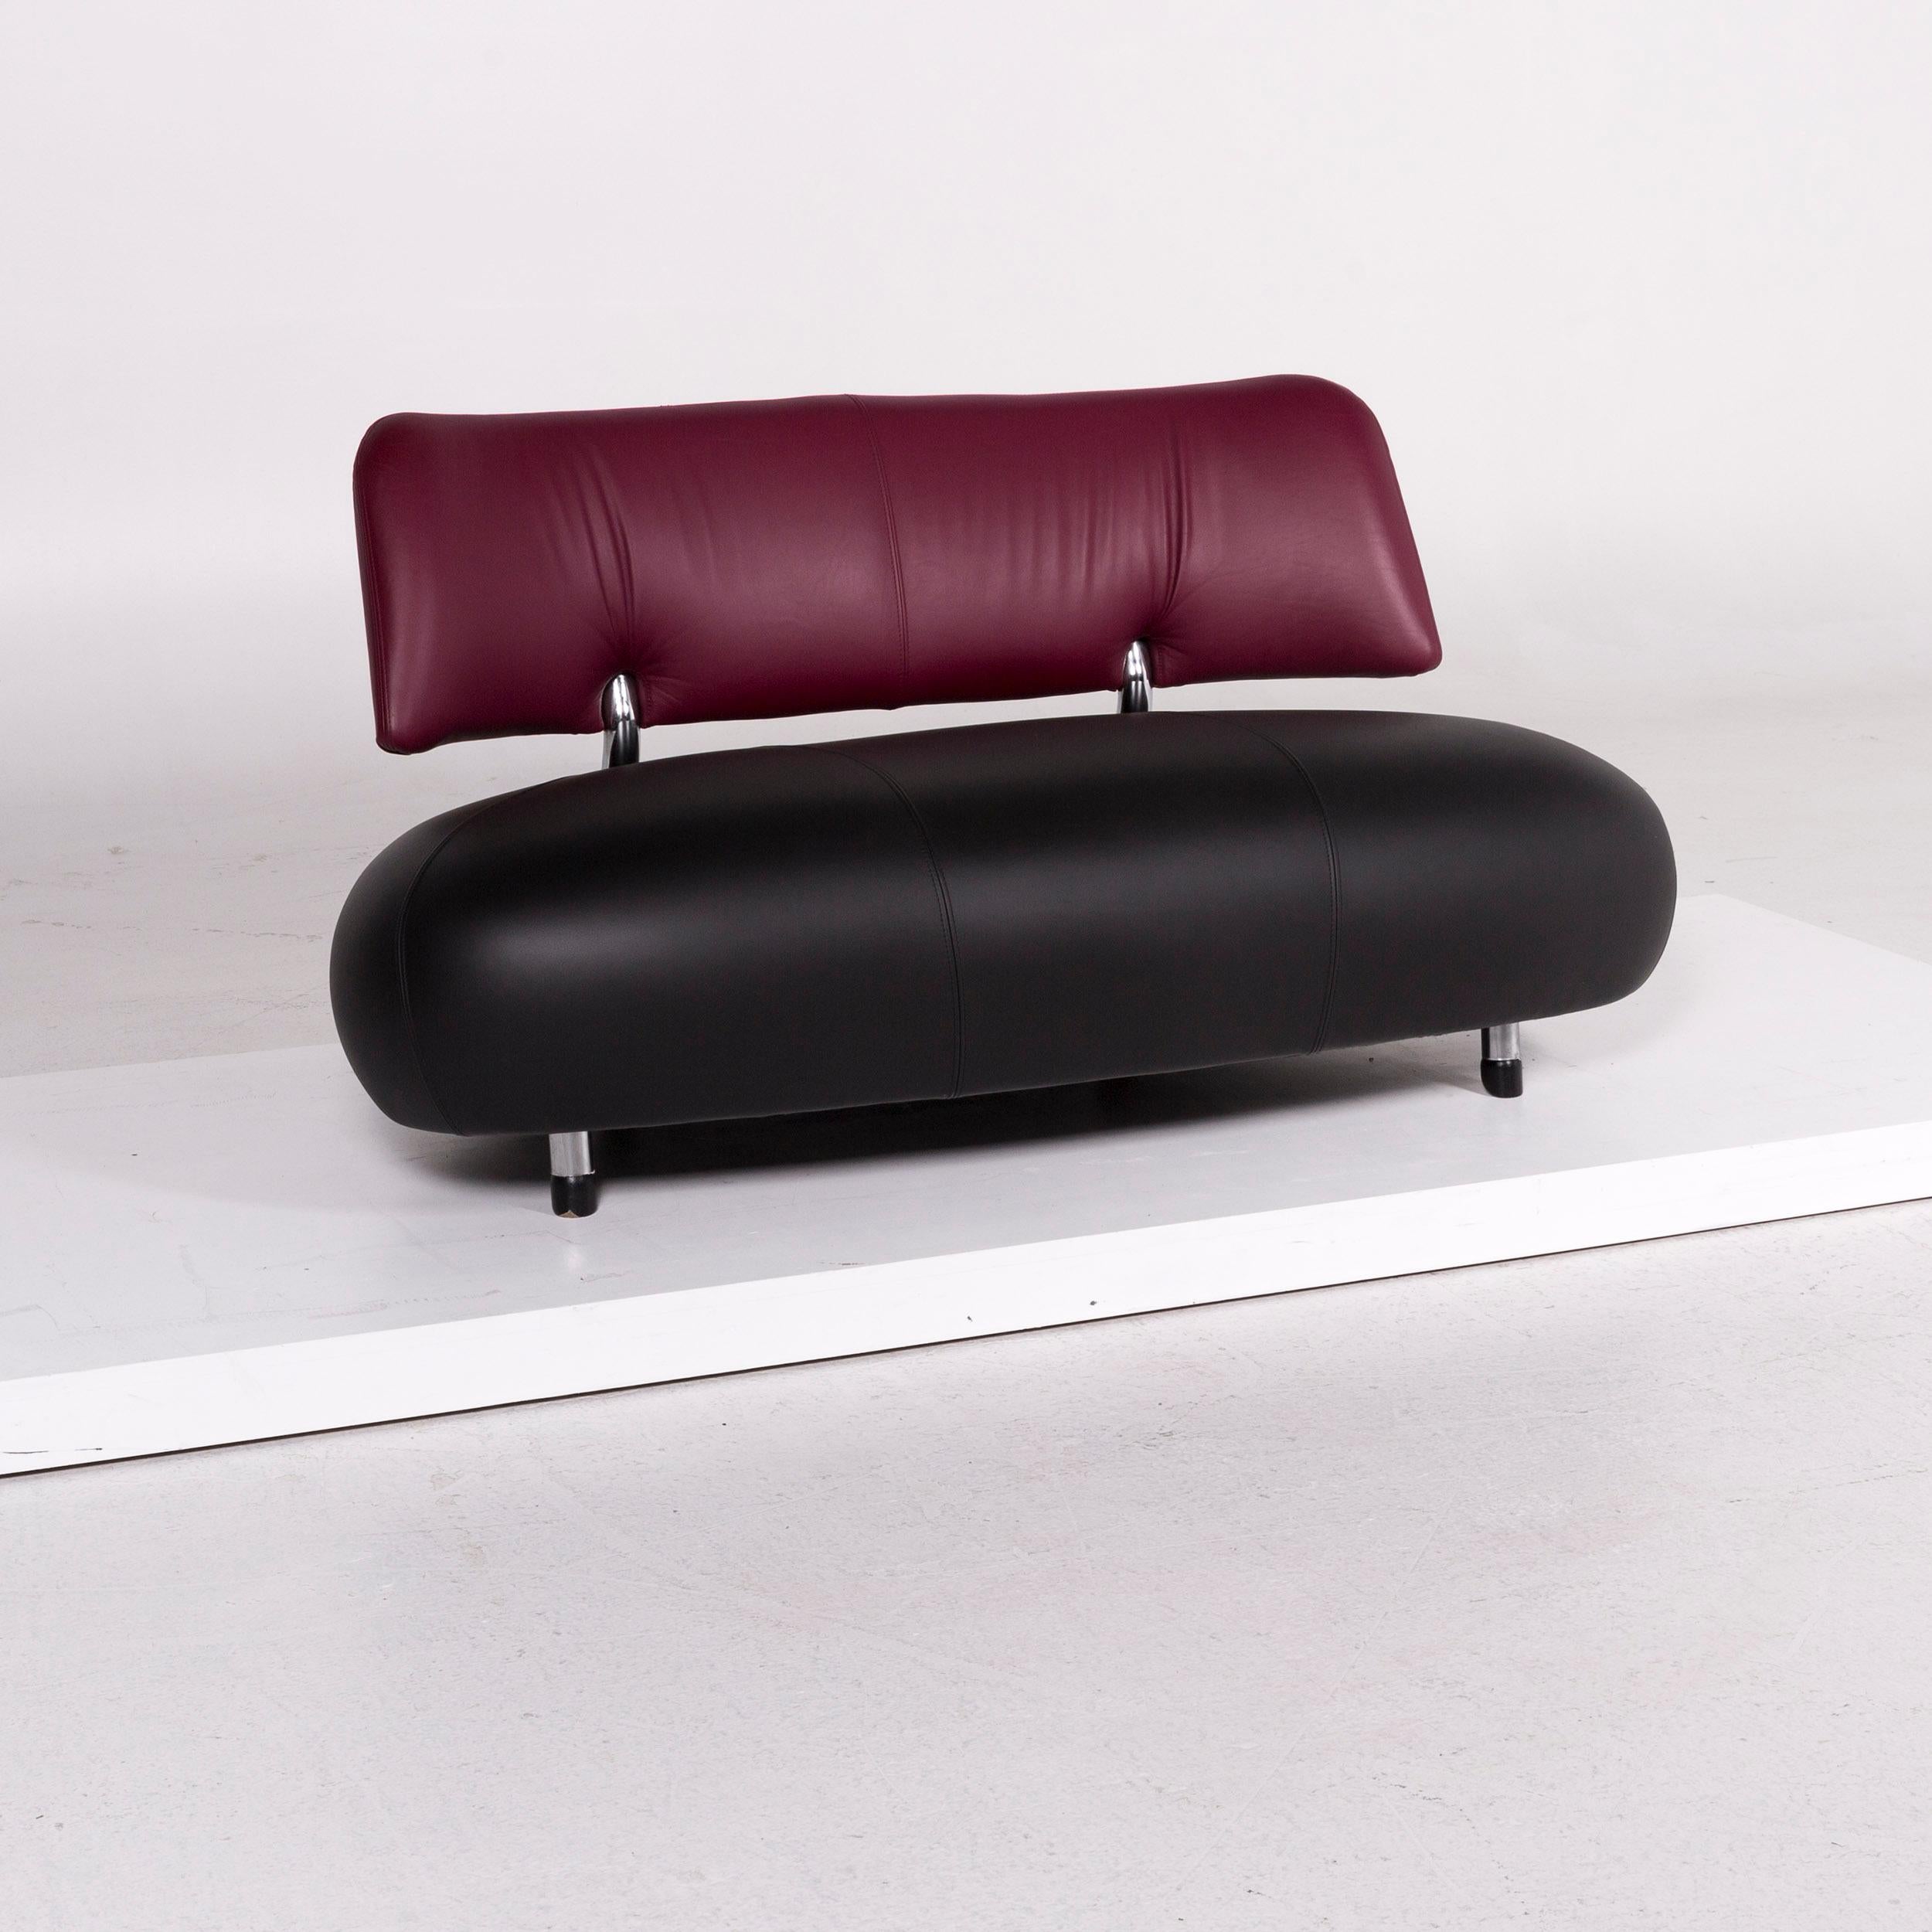 We bring to you a Leolux Pallone leather sofa black purple two-seat couch.
 

Product measurements in centimetres:
 

Depth 85
Width 144
Height 78
Seat-height 40
Seat-depth 60
Seat-width 144
Back-height 30.

   